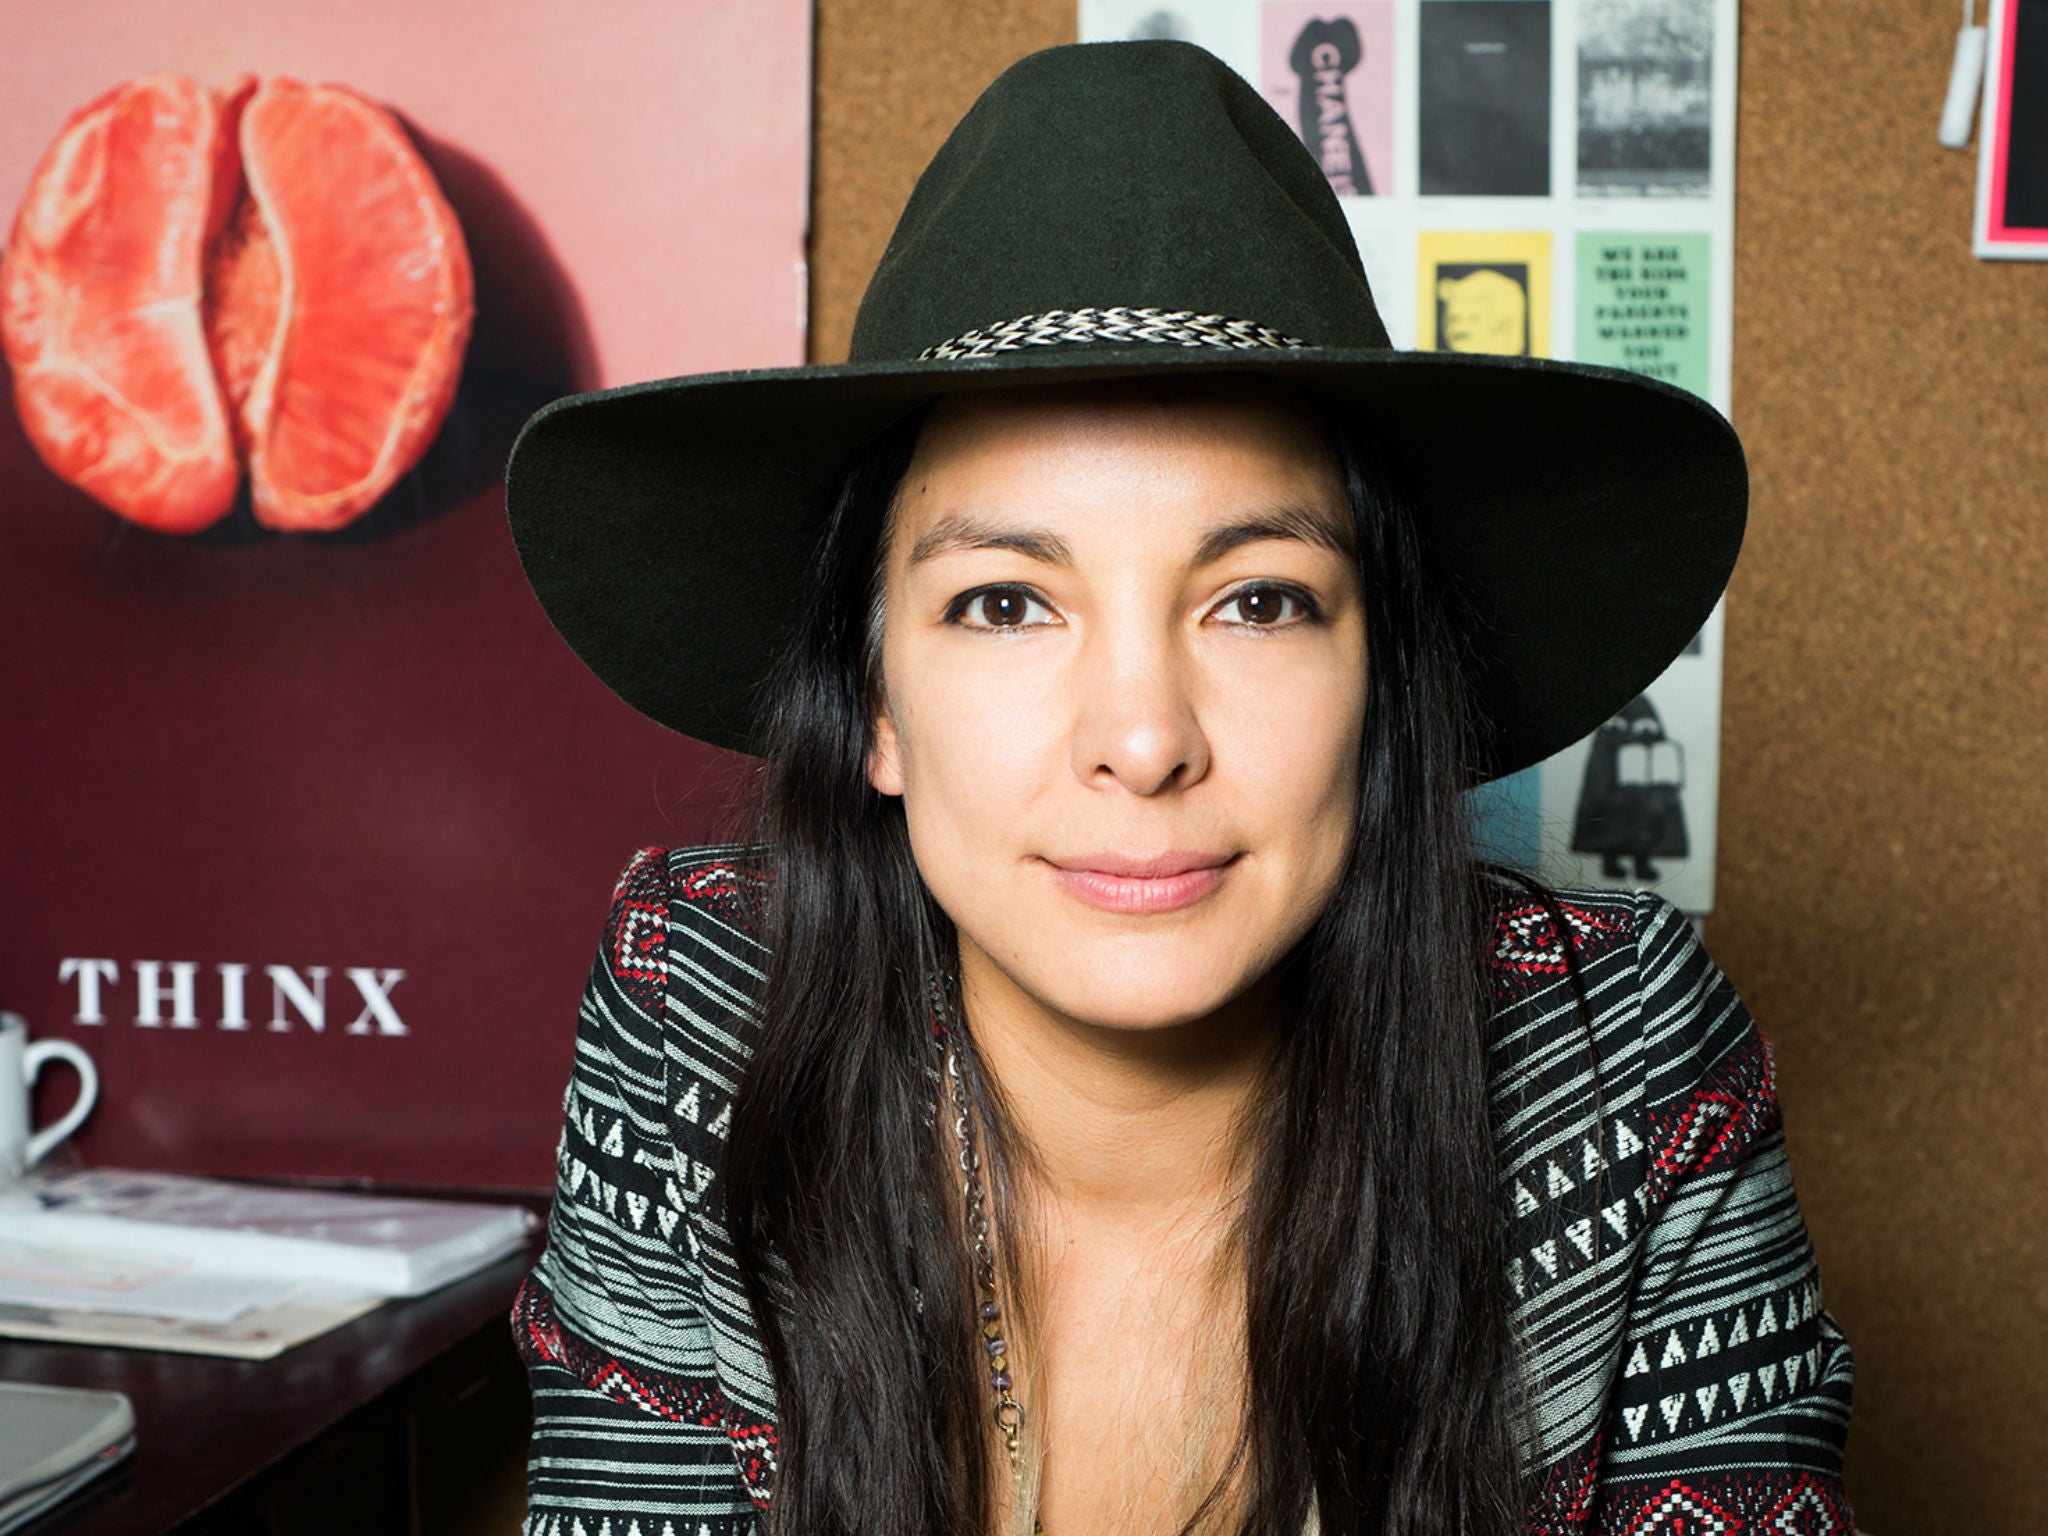 Miki Agrawal, co-founder of THINX, said periods are still a 'taboo' and that needs to change